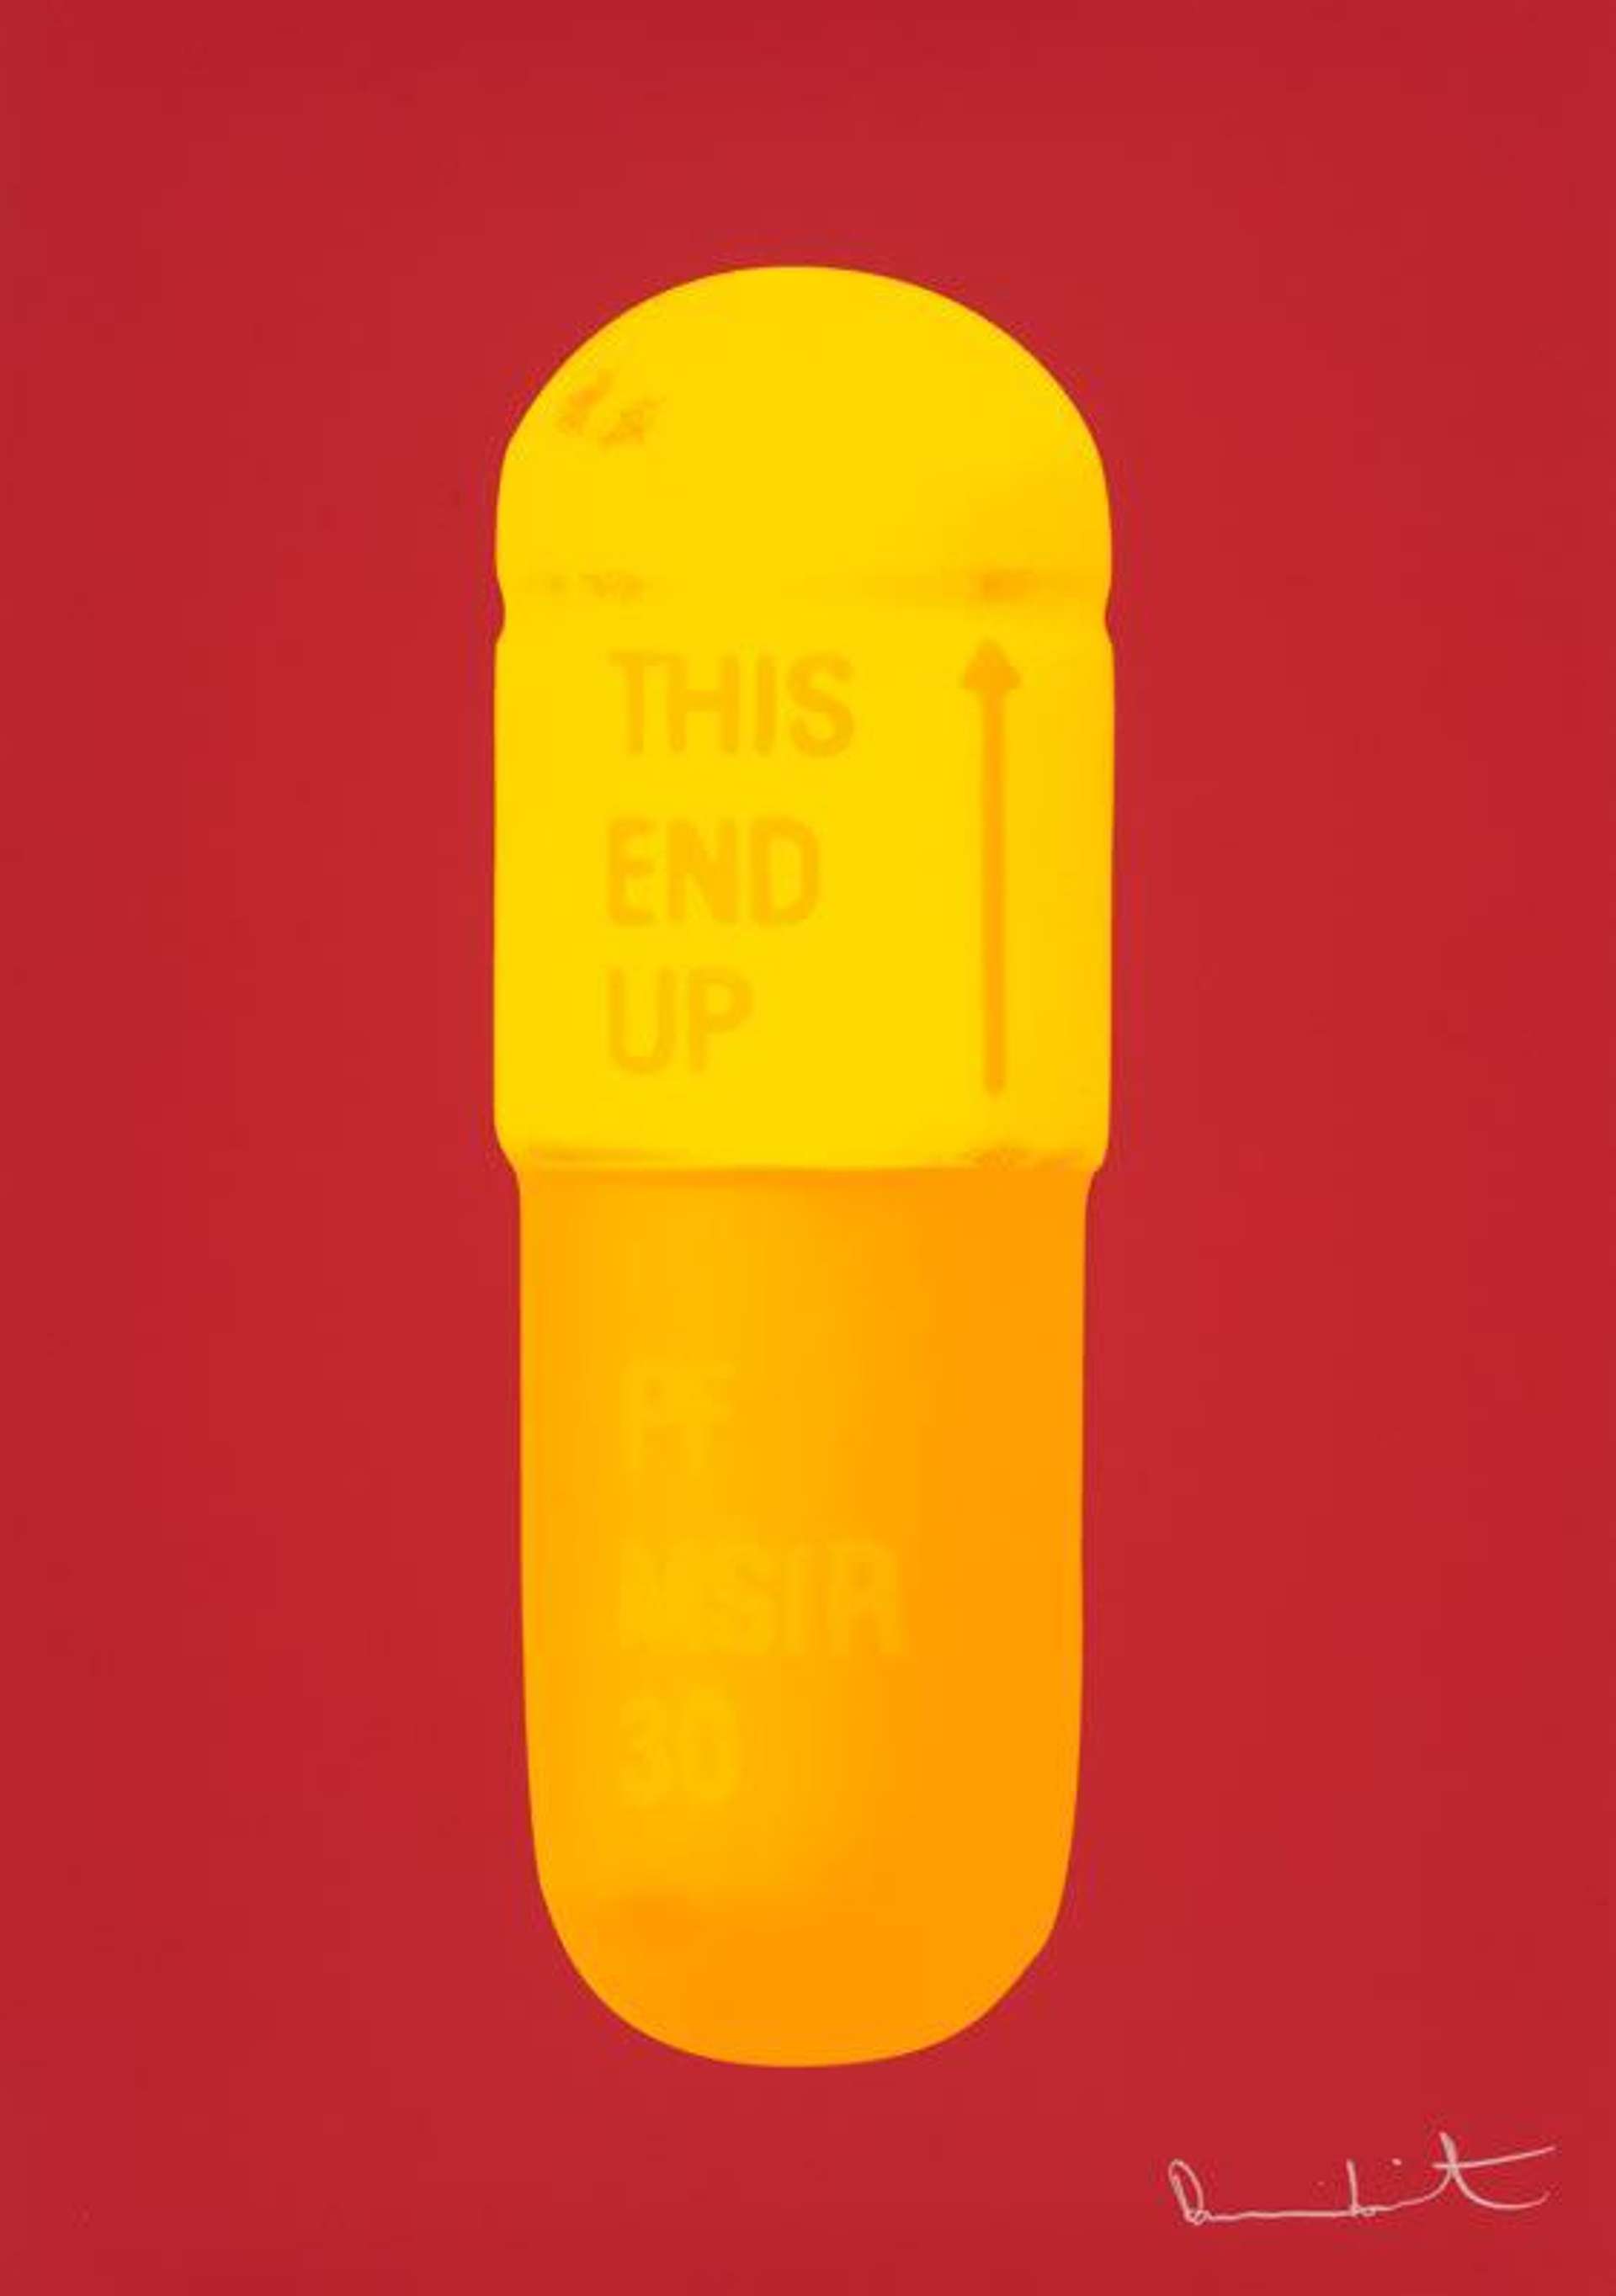 The Cure (fire red, sun yellow. fire orange) - Signed Print by Damien Hirst 2014 - MyArtBroker